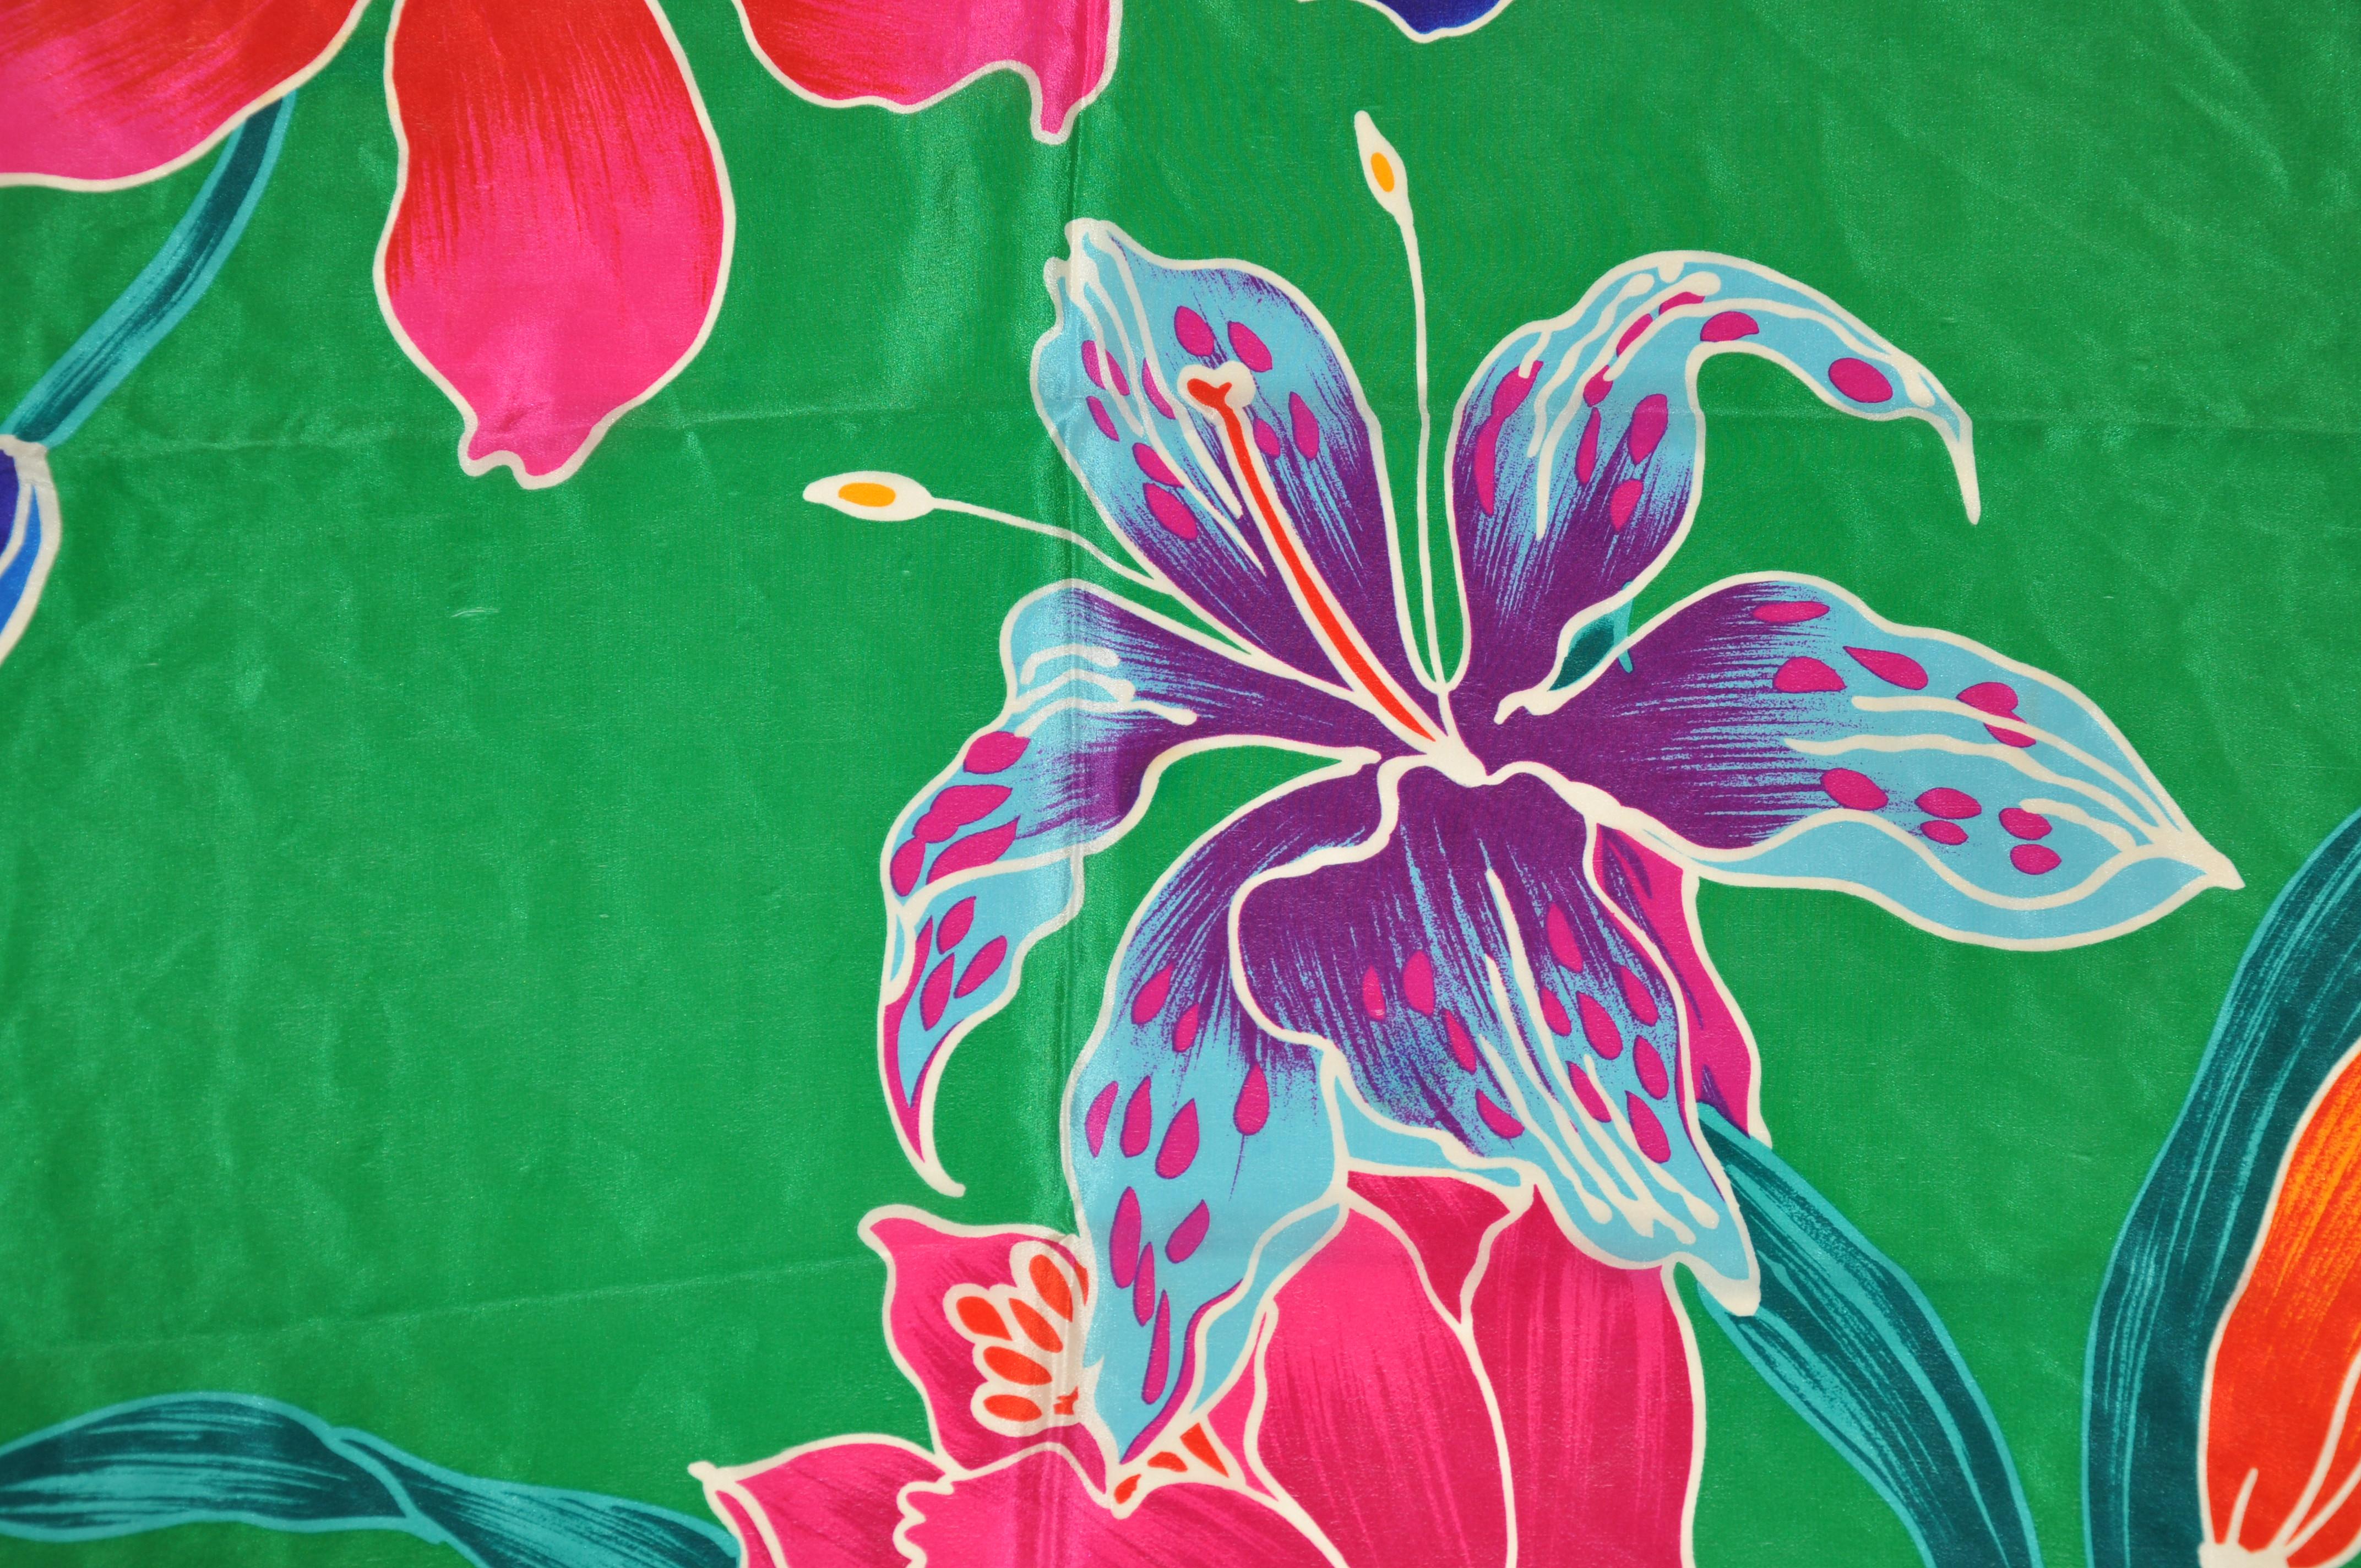      This wonderfully vivid multicolors with green orchids silk scarf, measures 30 inches by 30 inches. Made in Japan.